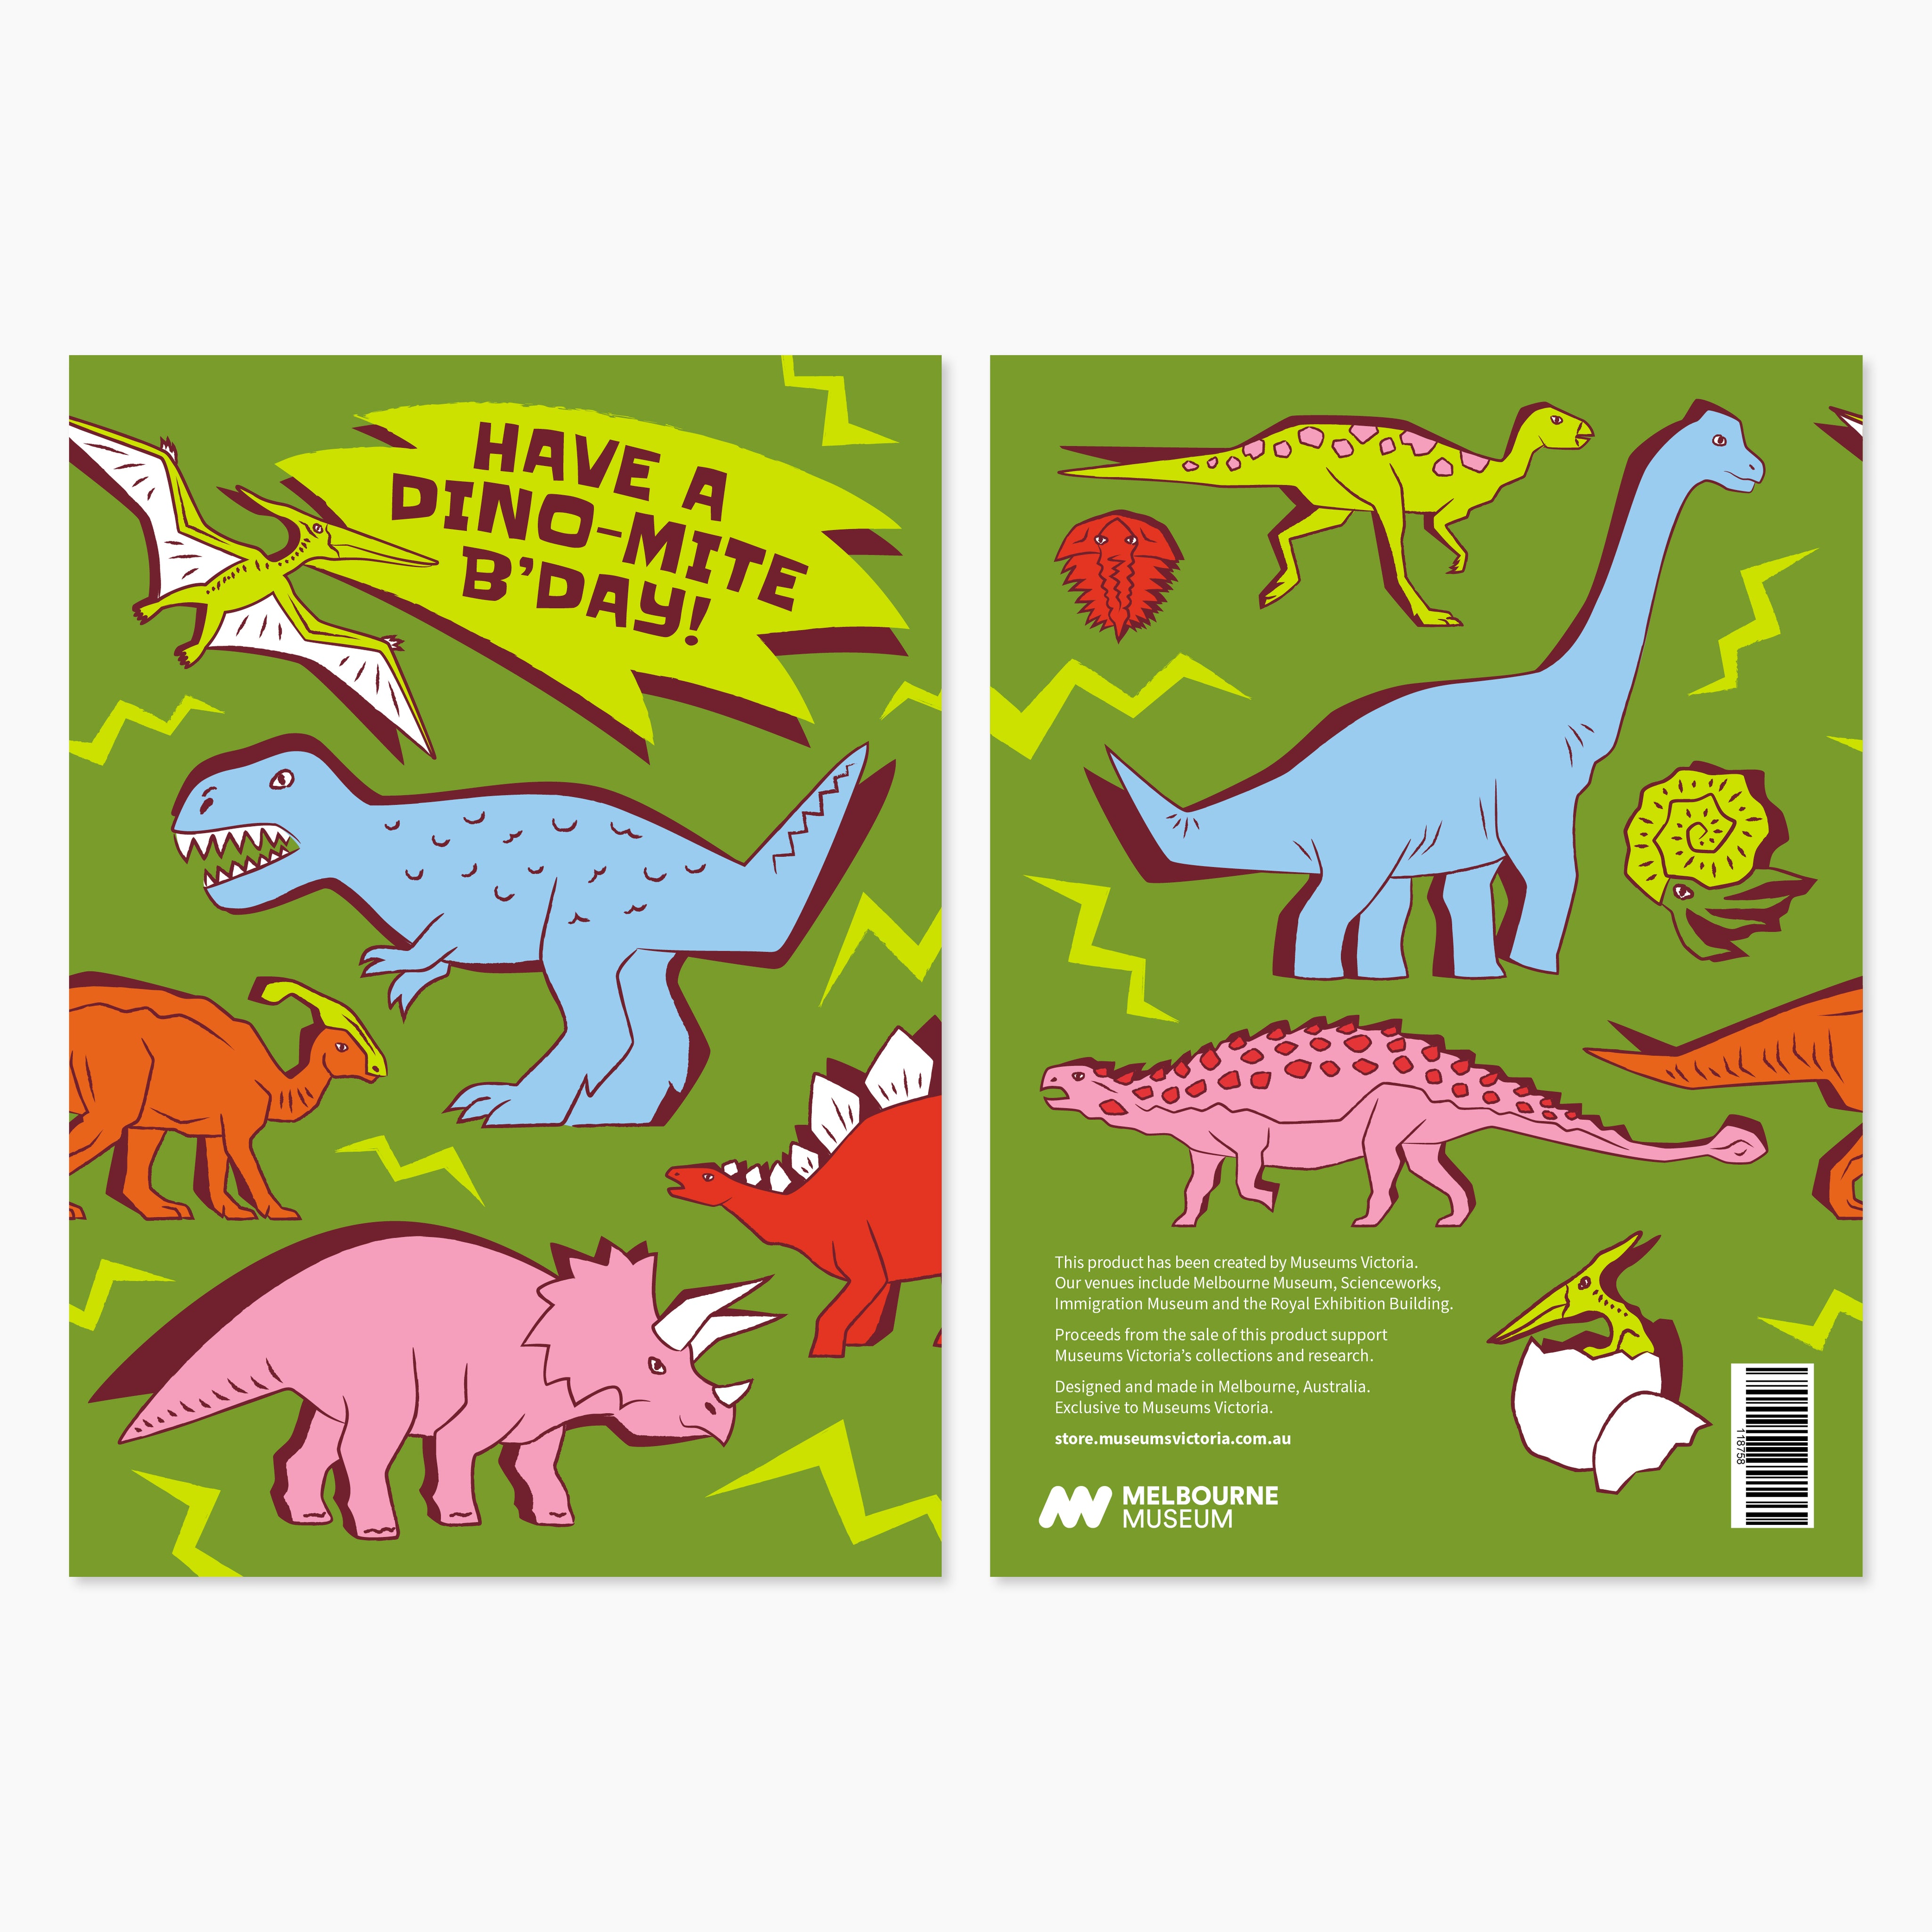 Home of Dinos Greeting Card